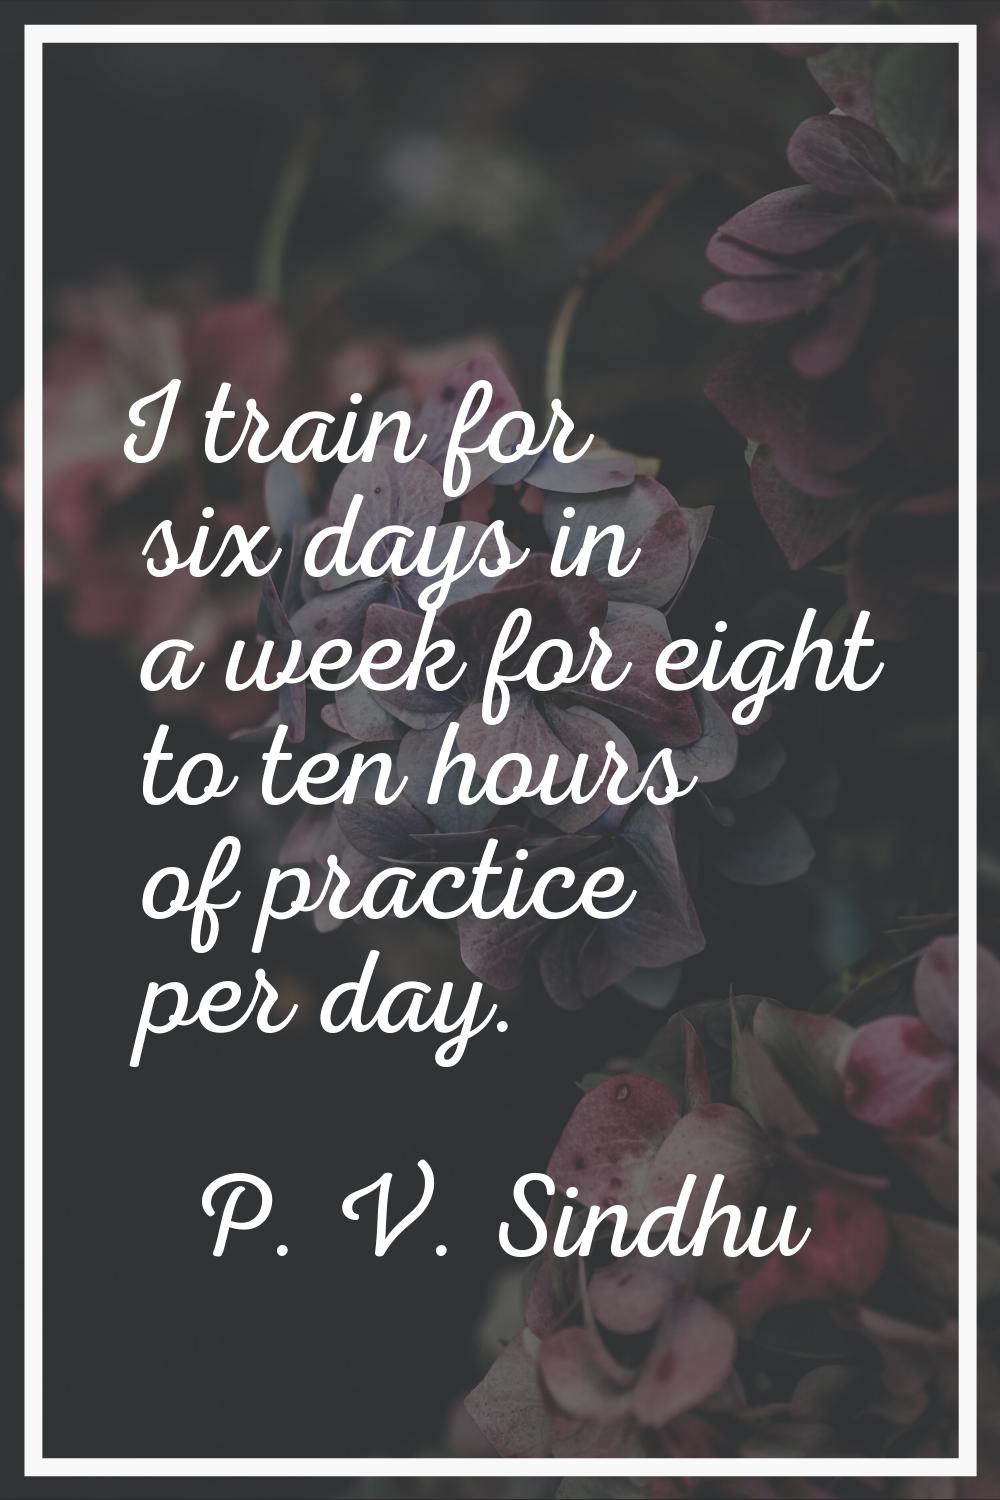 I train for six days in a week for eight to ten hours of practice per day.